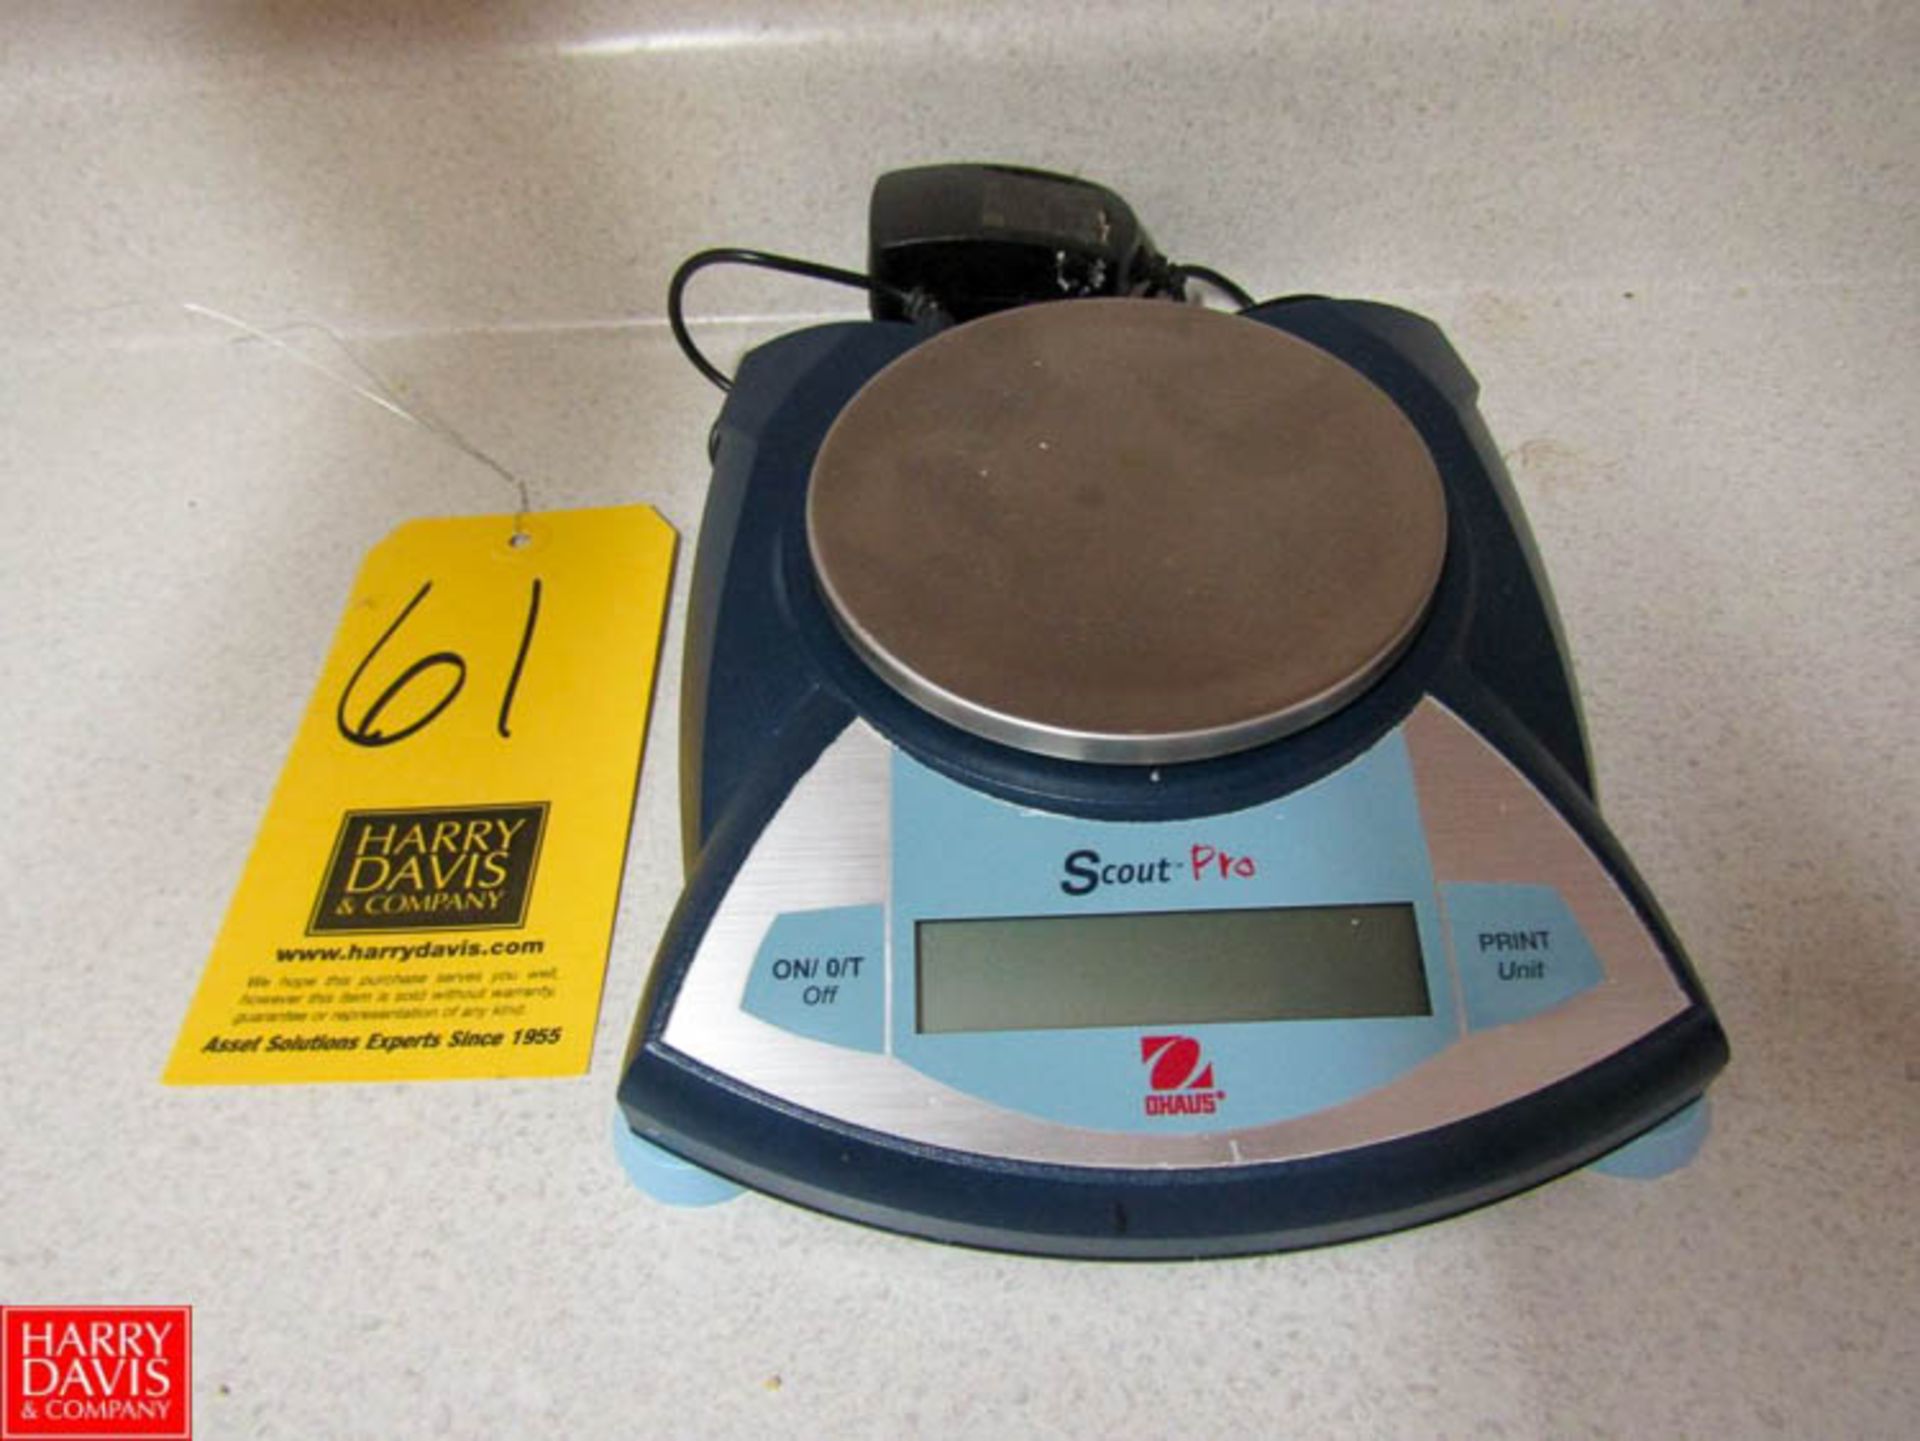 Ohaus 400 Gram Capacity Digital Lab Scale Model Scout Pro SP401 Rigging Fee: $ 15